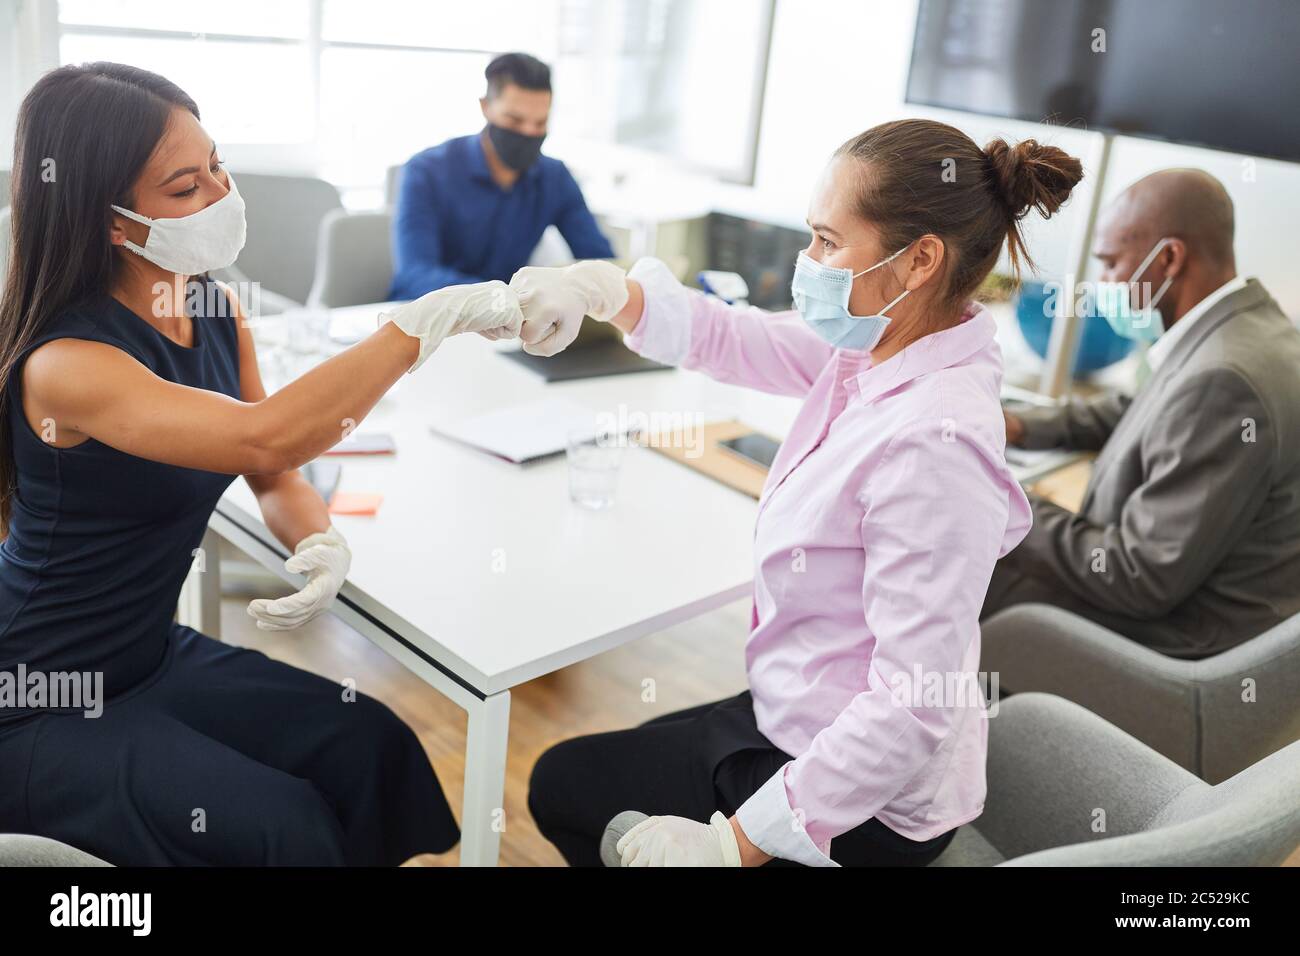 Two business women greet each other with a fist against the risk of infection with the corona virus Stock Photo